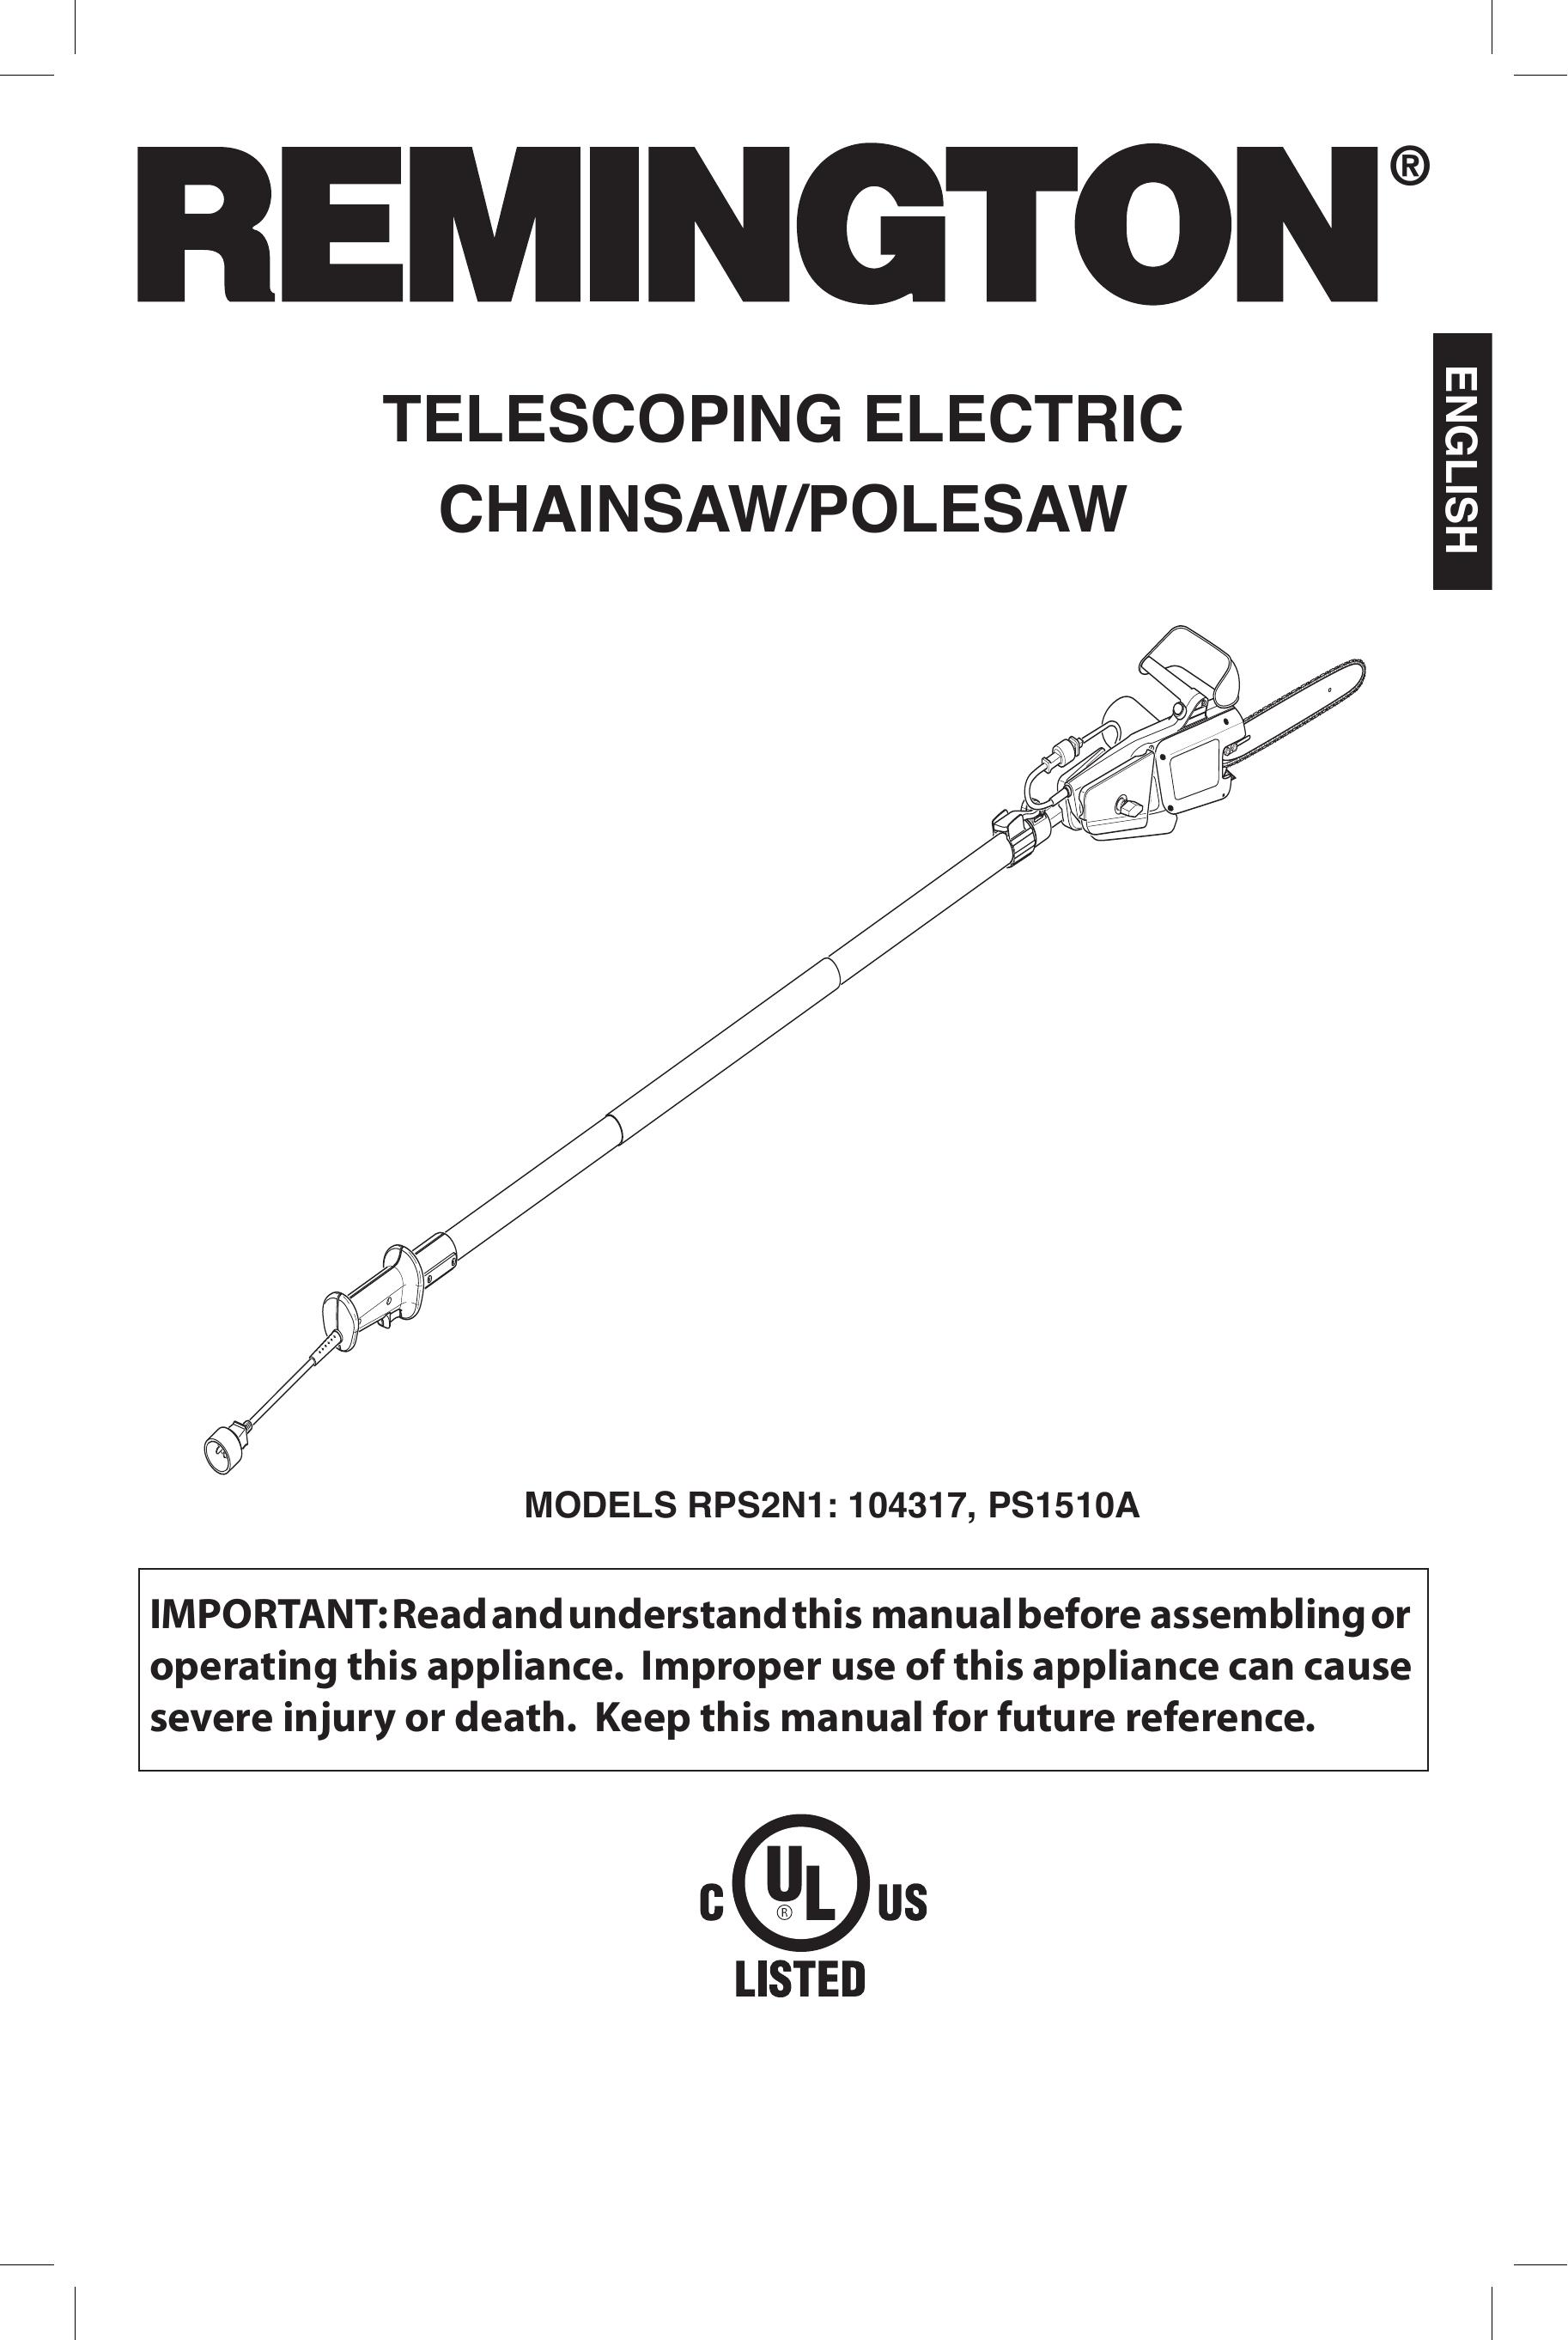 Remington Power Tools RPS2N1, 104317, PS1510A Chainsaw User Manual